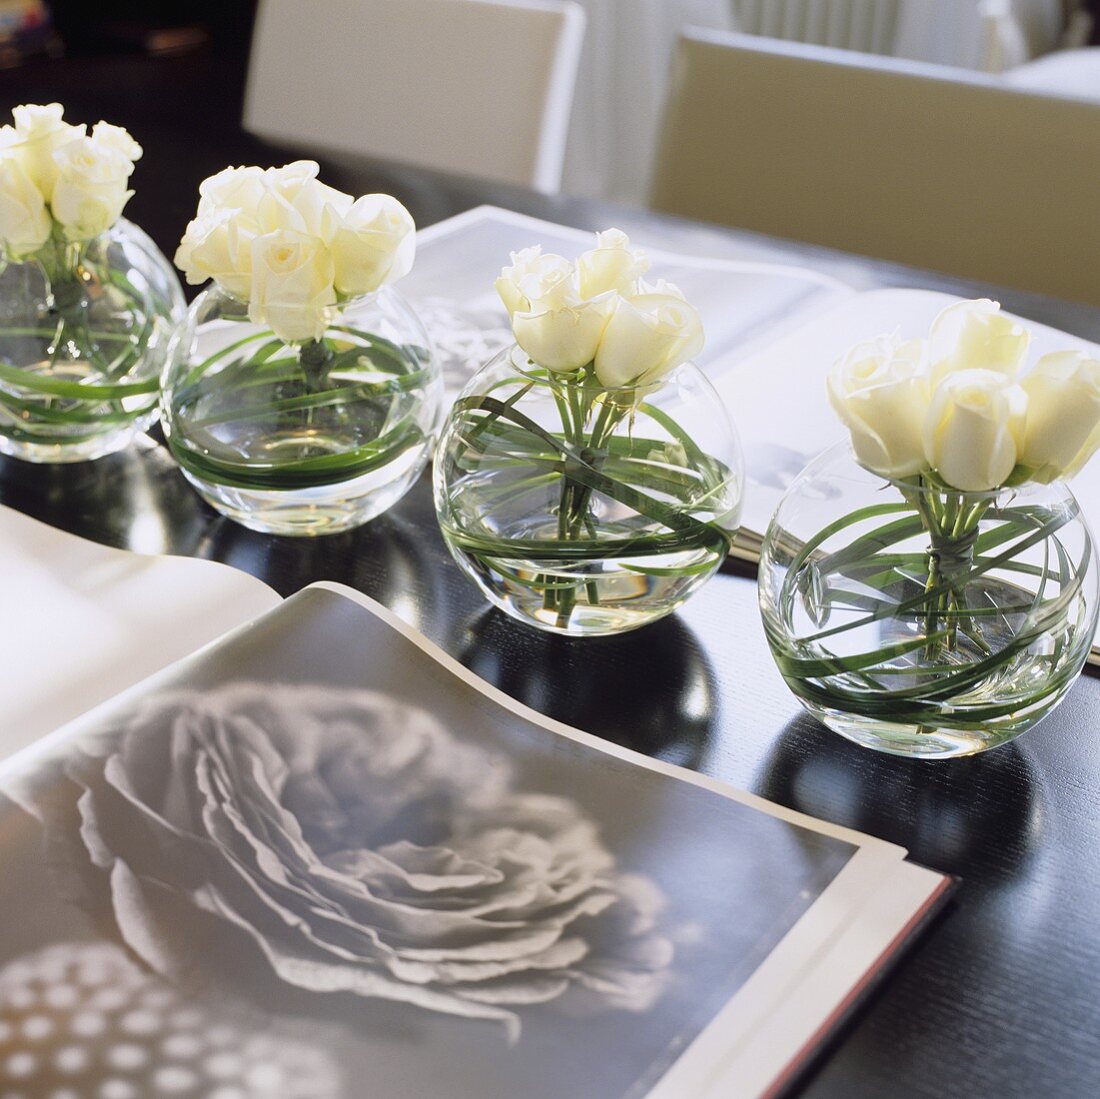 White roses in round glass vases and an open book with a picture of a flower